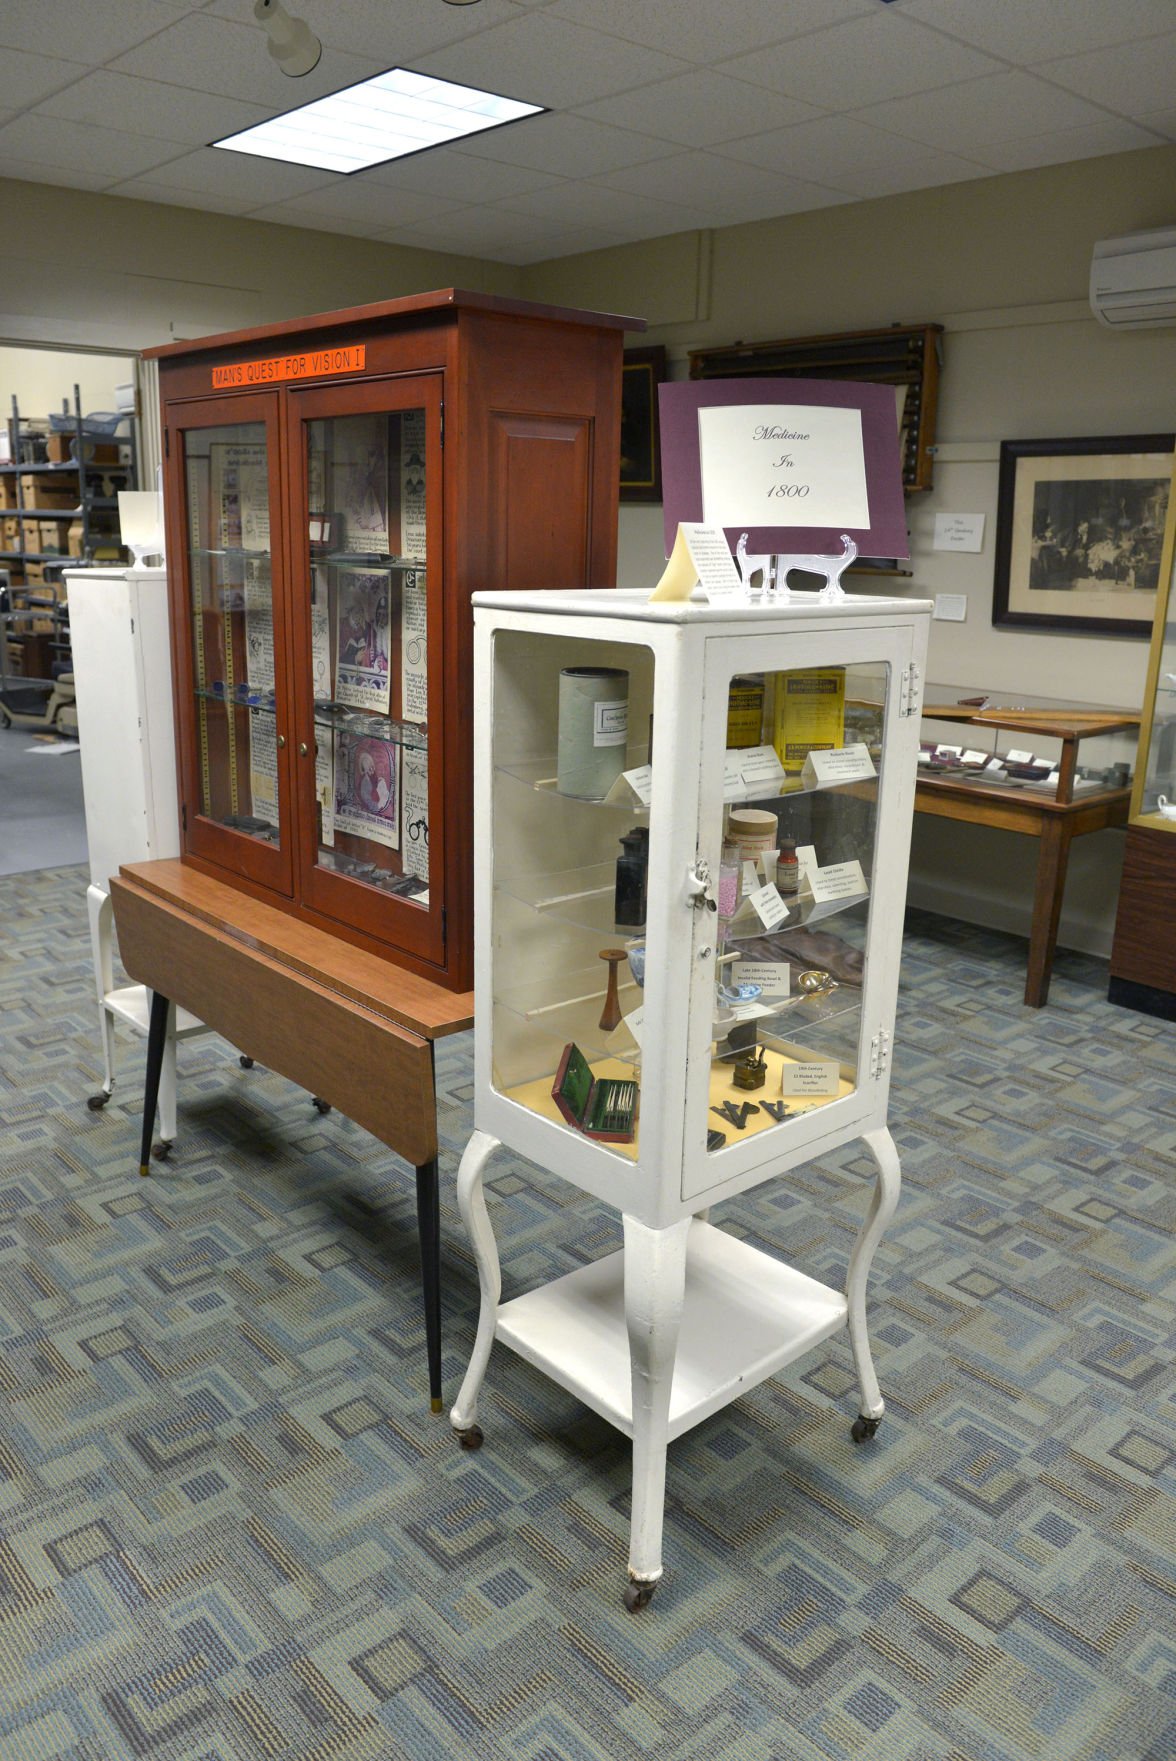 Medical museum tells the history of healing in Lancaster County | Trending ...1176 x 1761